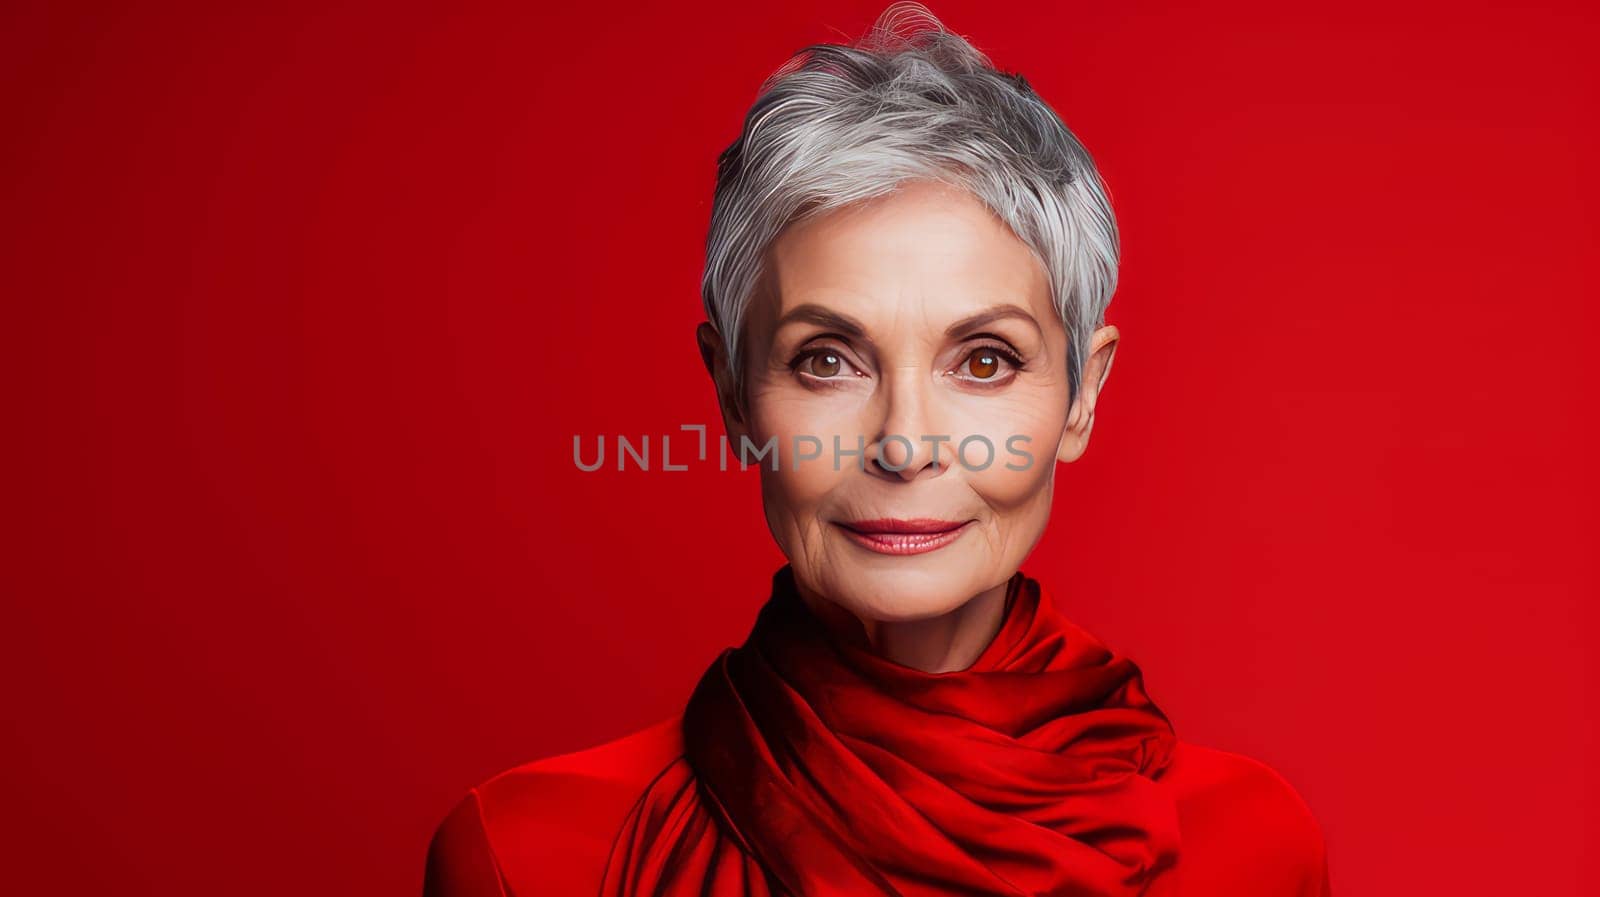 Elegant, smiling elderly, chic latino, Spain woman with gray hair and perfect skin, red background banner. Advertising of cosmetic products, spa treatments, shampoos and hair care products, dentistry and medicine, perfumes and cosmetology for women